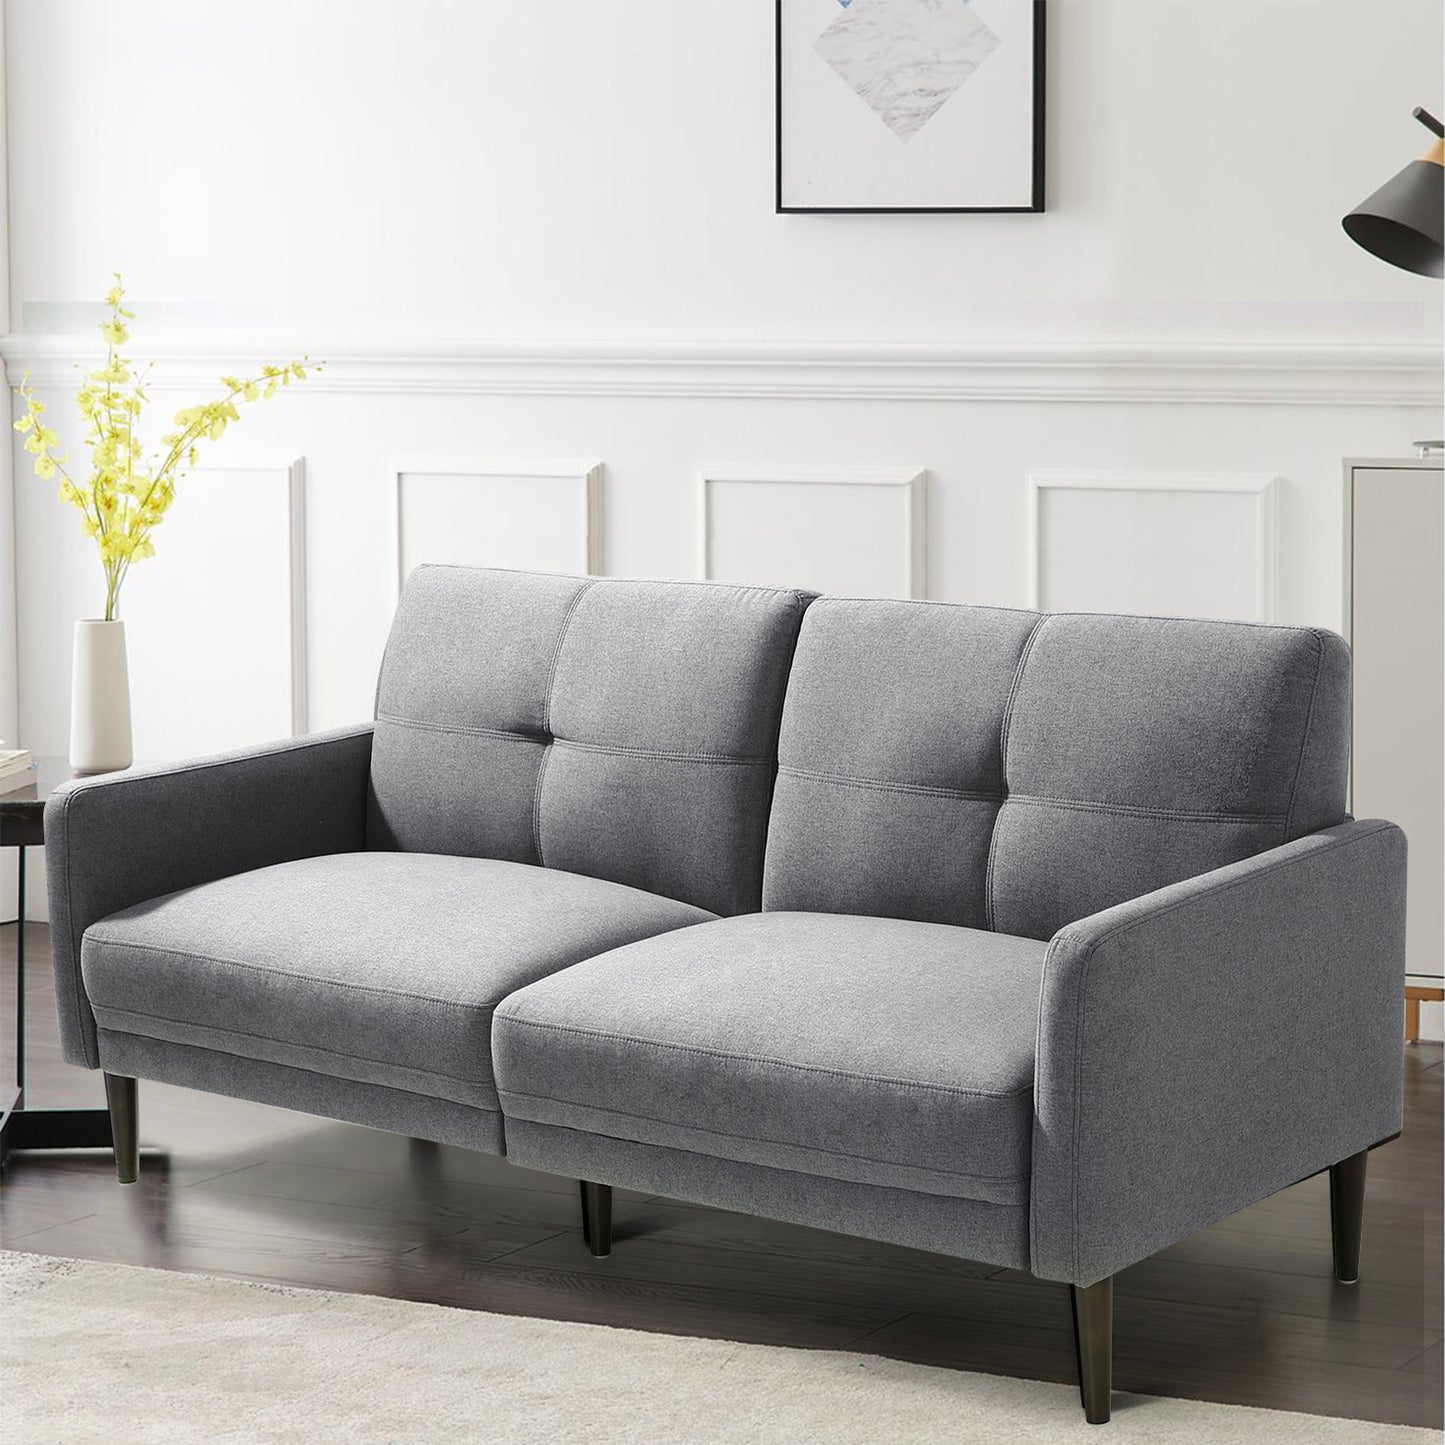 Grey Sofa Loveseat/Modern Couch with Solid Wood Frame/Easy,Soft and Comfortable,Tool-Free Assembly